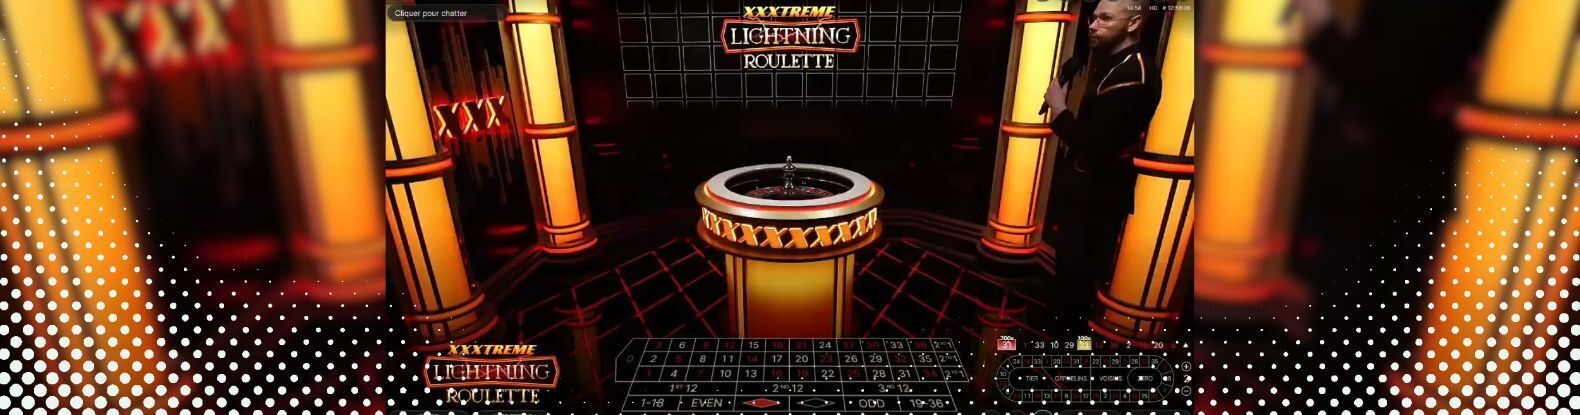 This is a screenshot of Xxxtreme Lightning Roulette Casino Game by Evolution